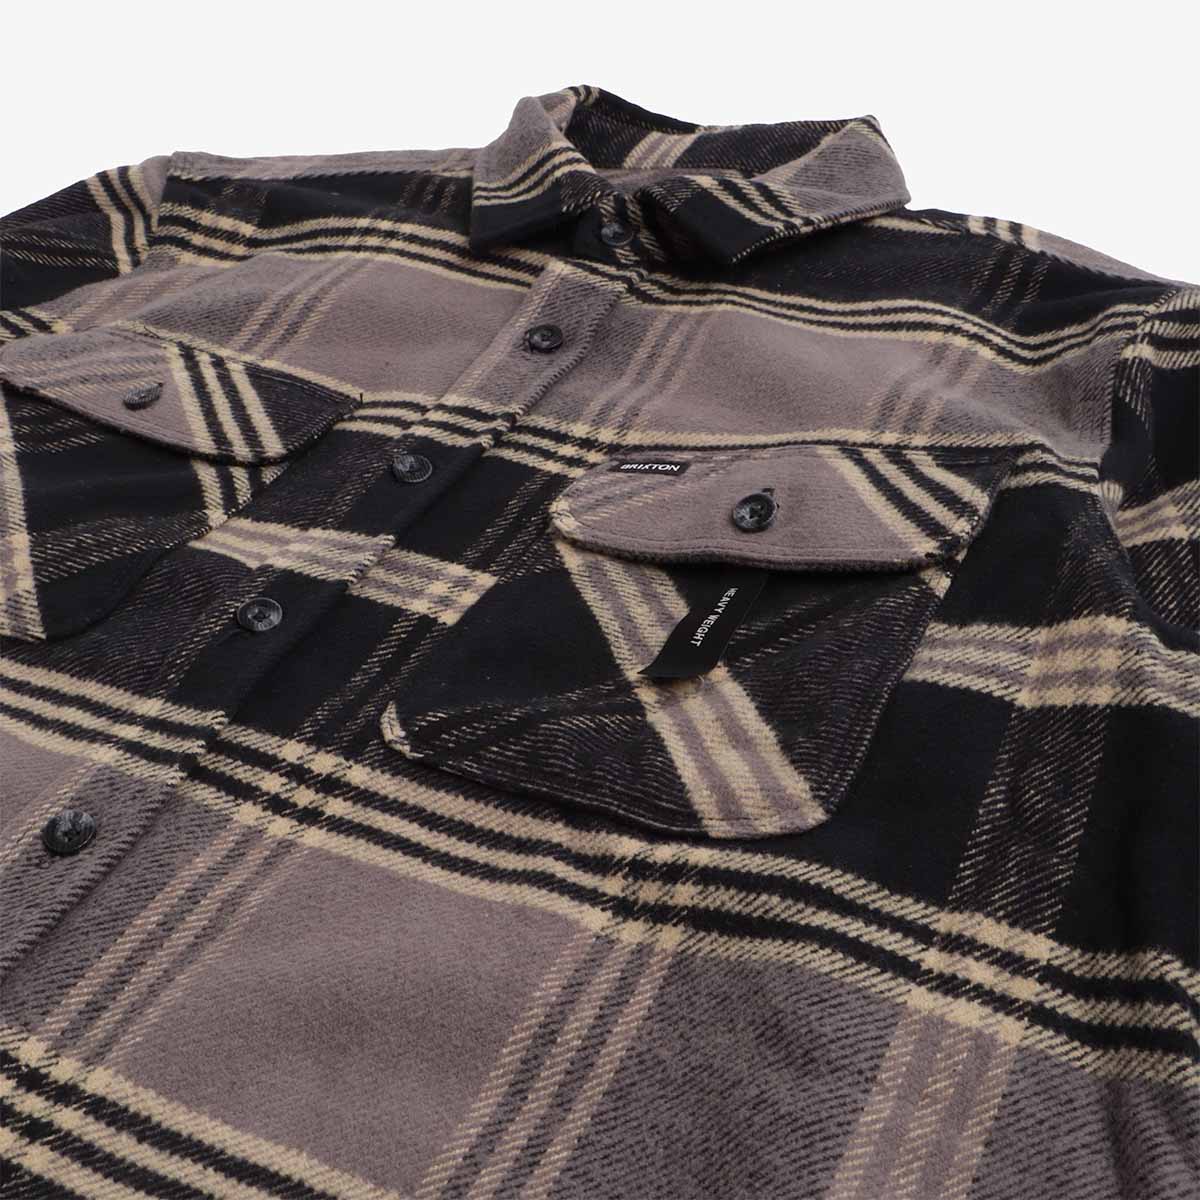 Brixton Bowery Heavy Weight Flannel Shirt